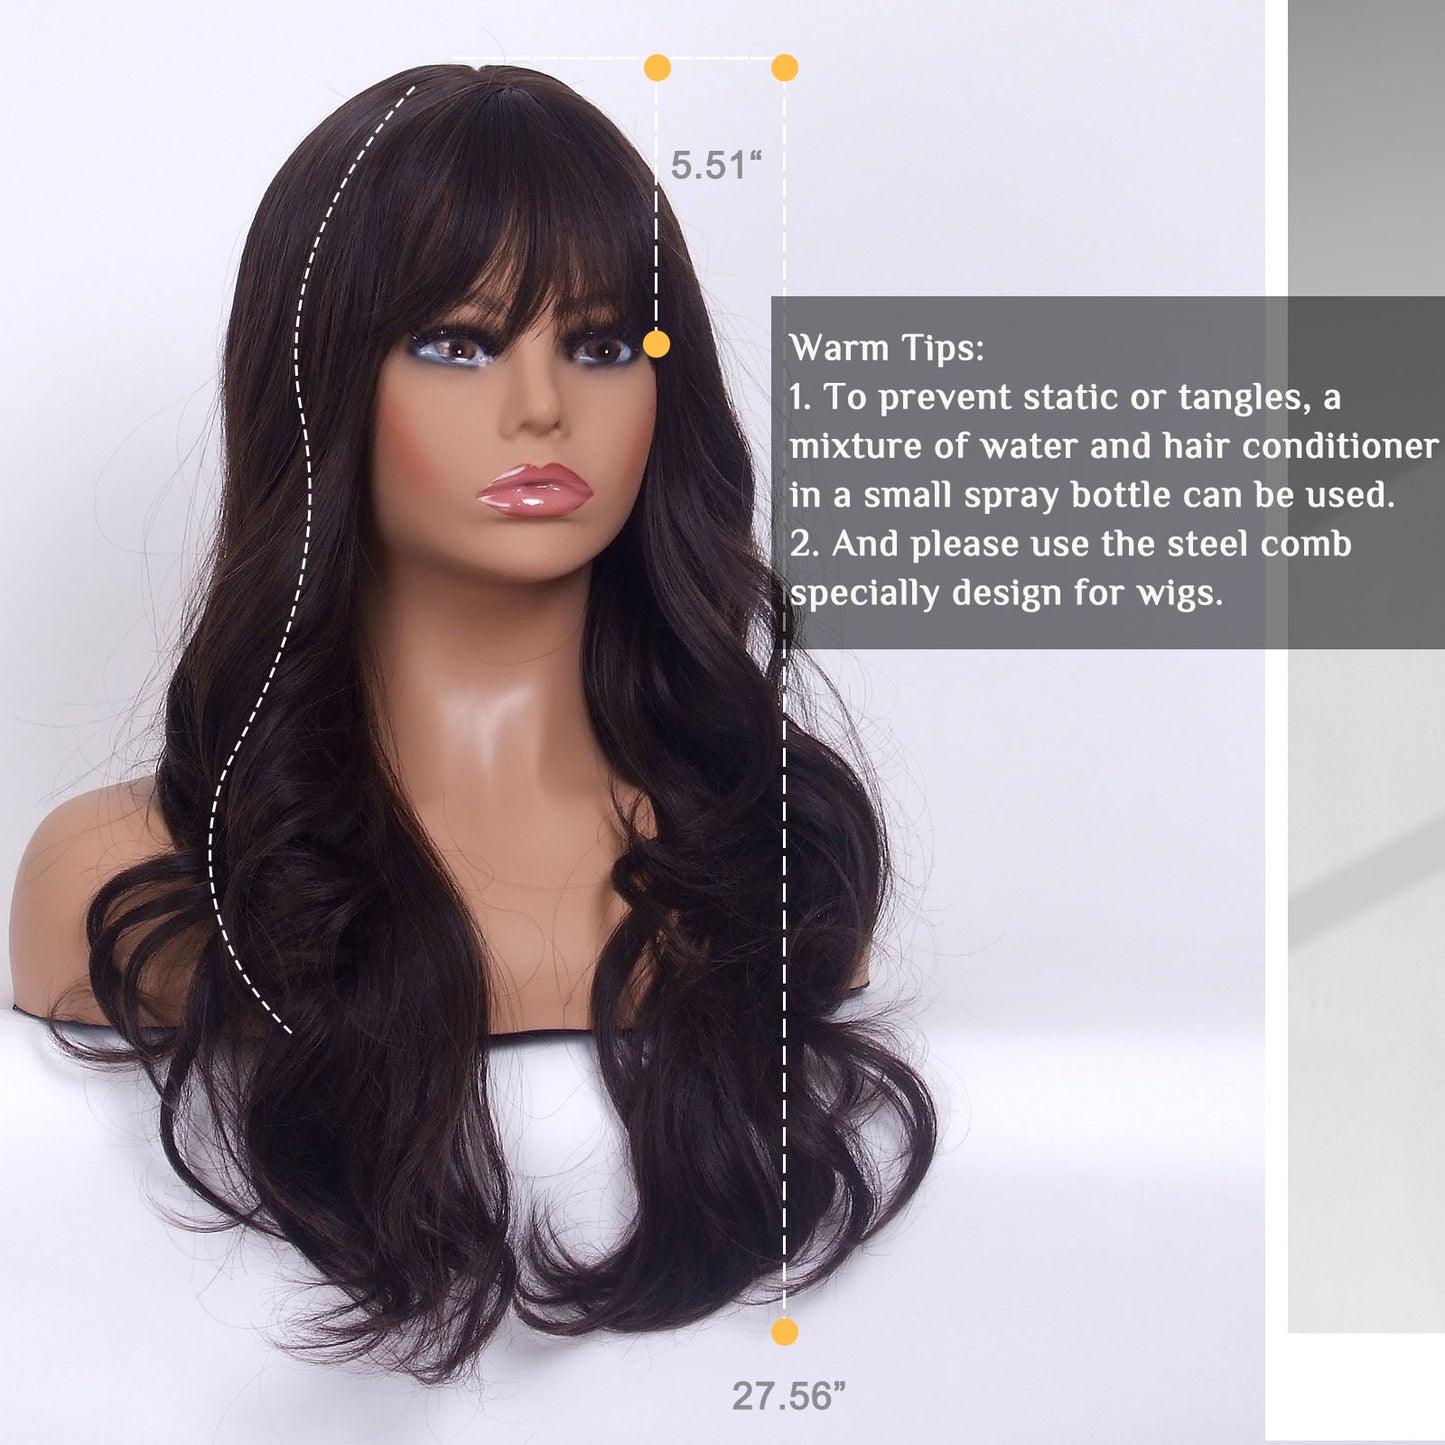 LINGDORA Long Curly Wavy Dark Brown Wig with Bangs for White Women Synthetic Hair